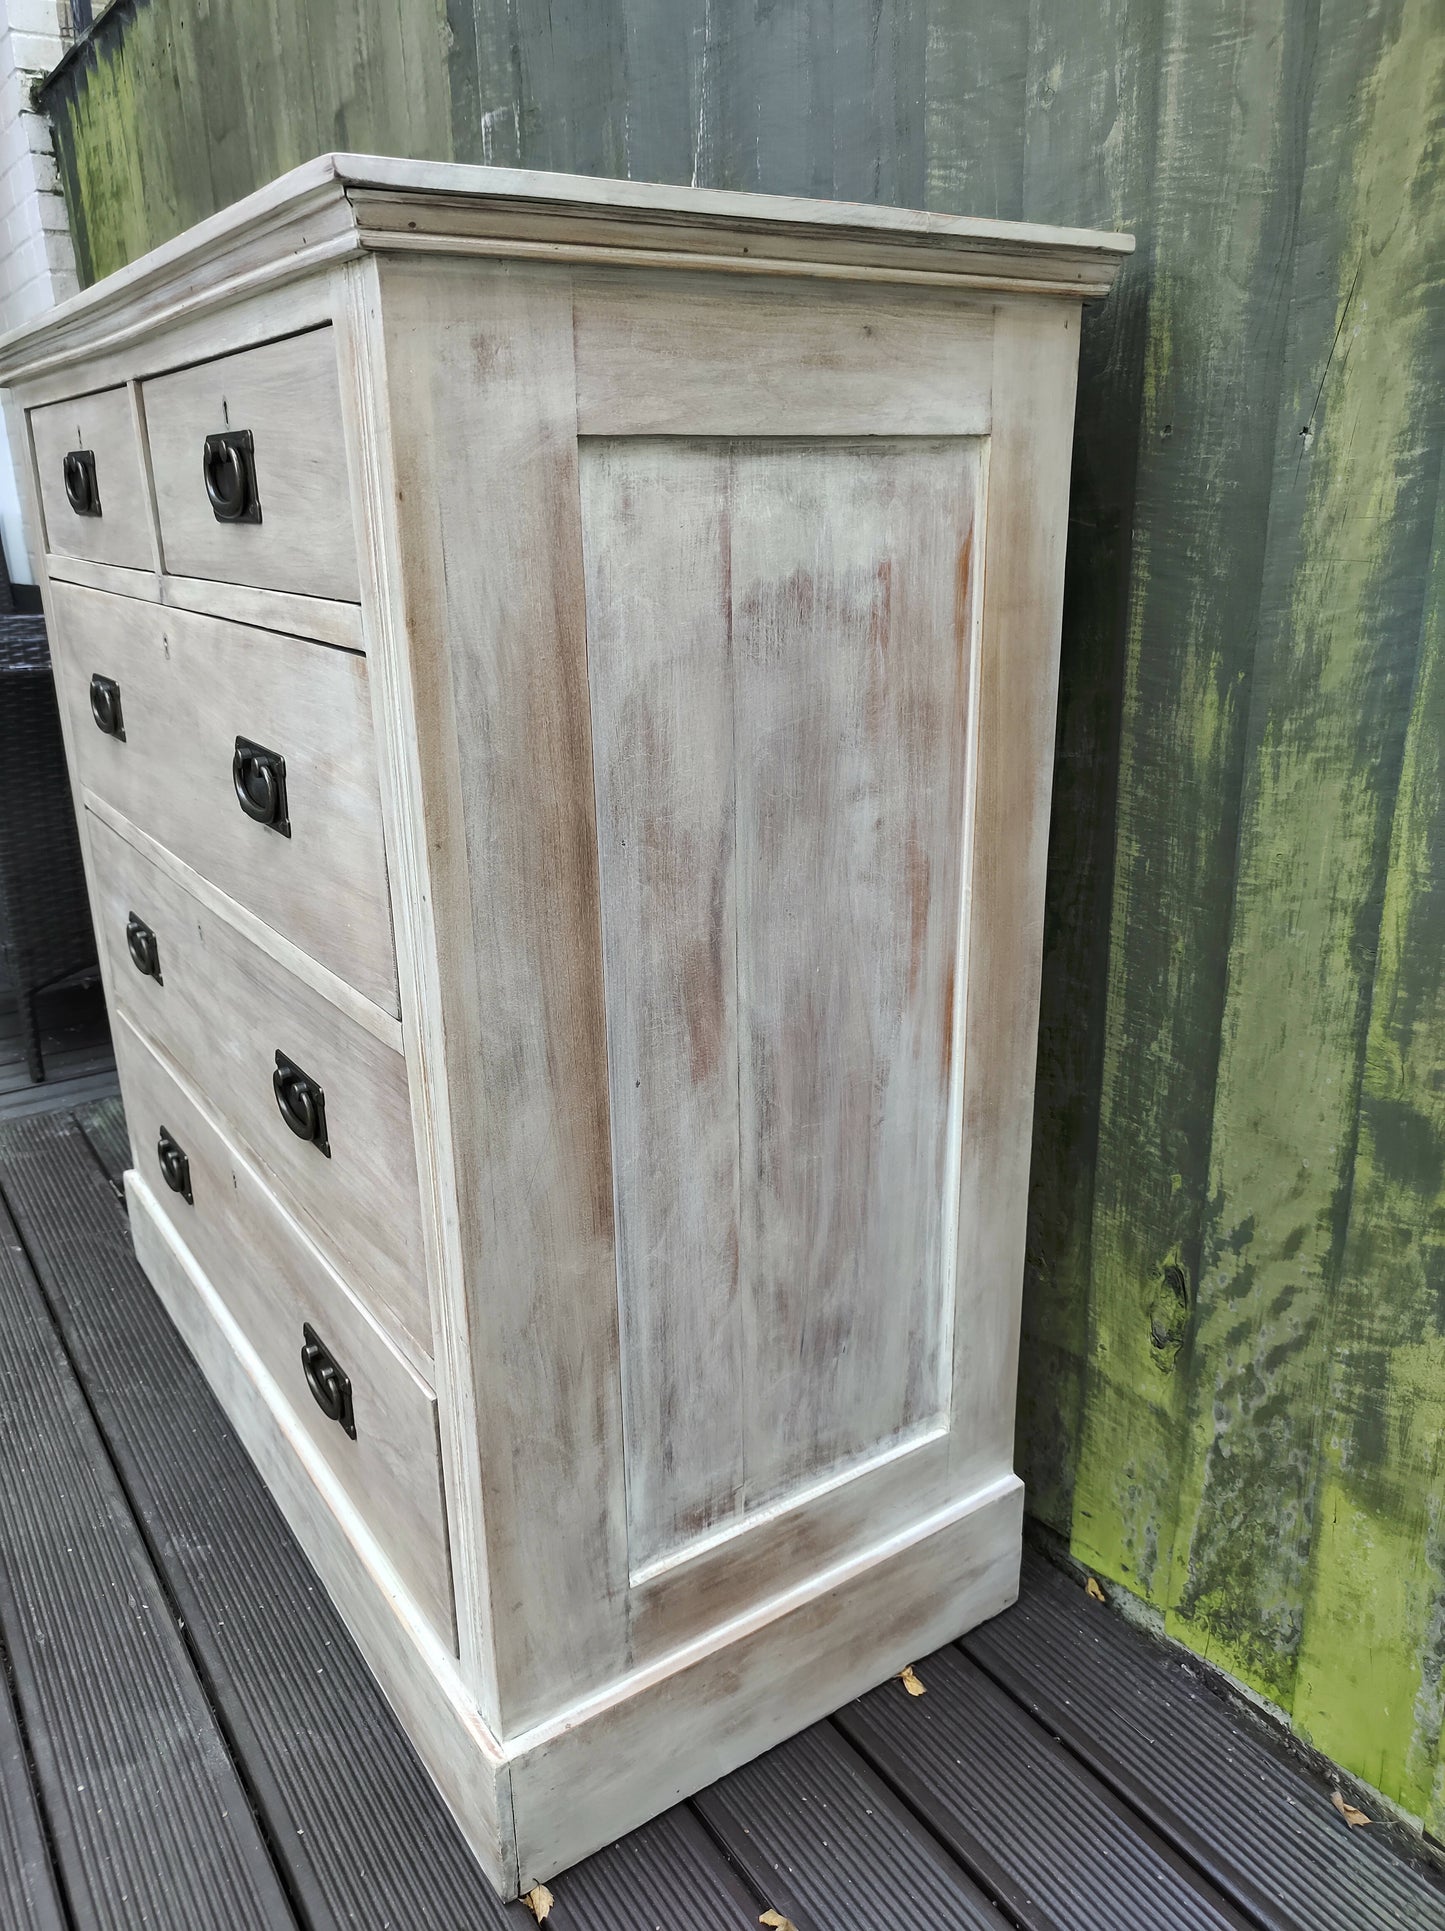 Victorian chest of drawers